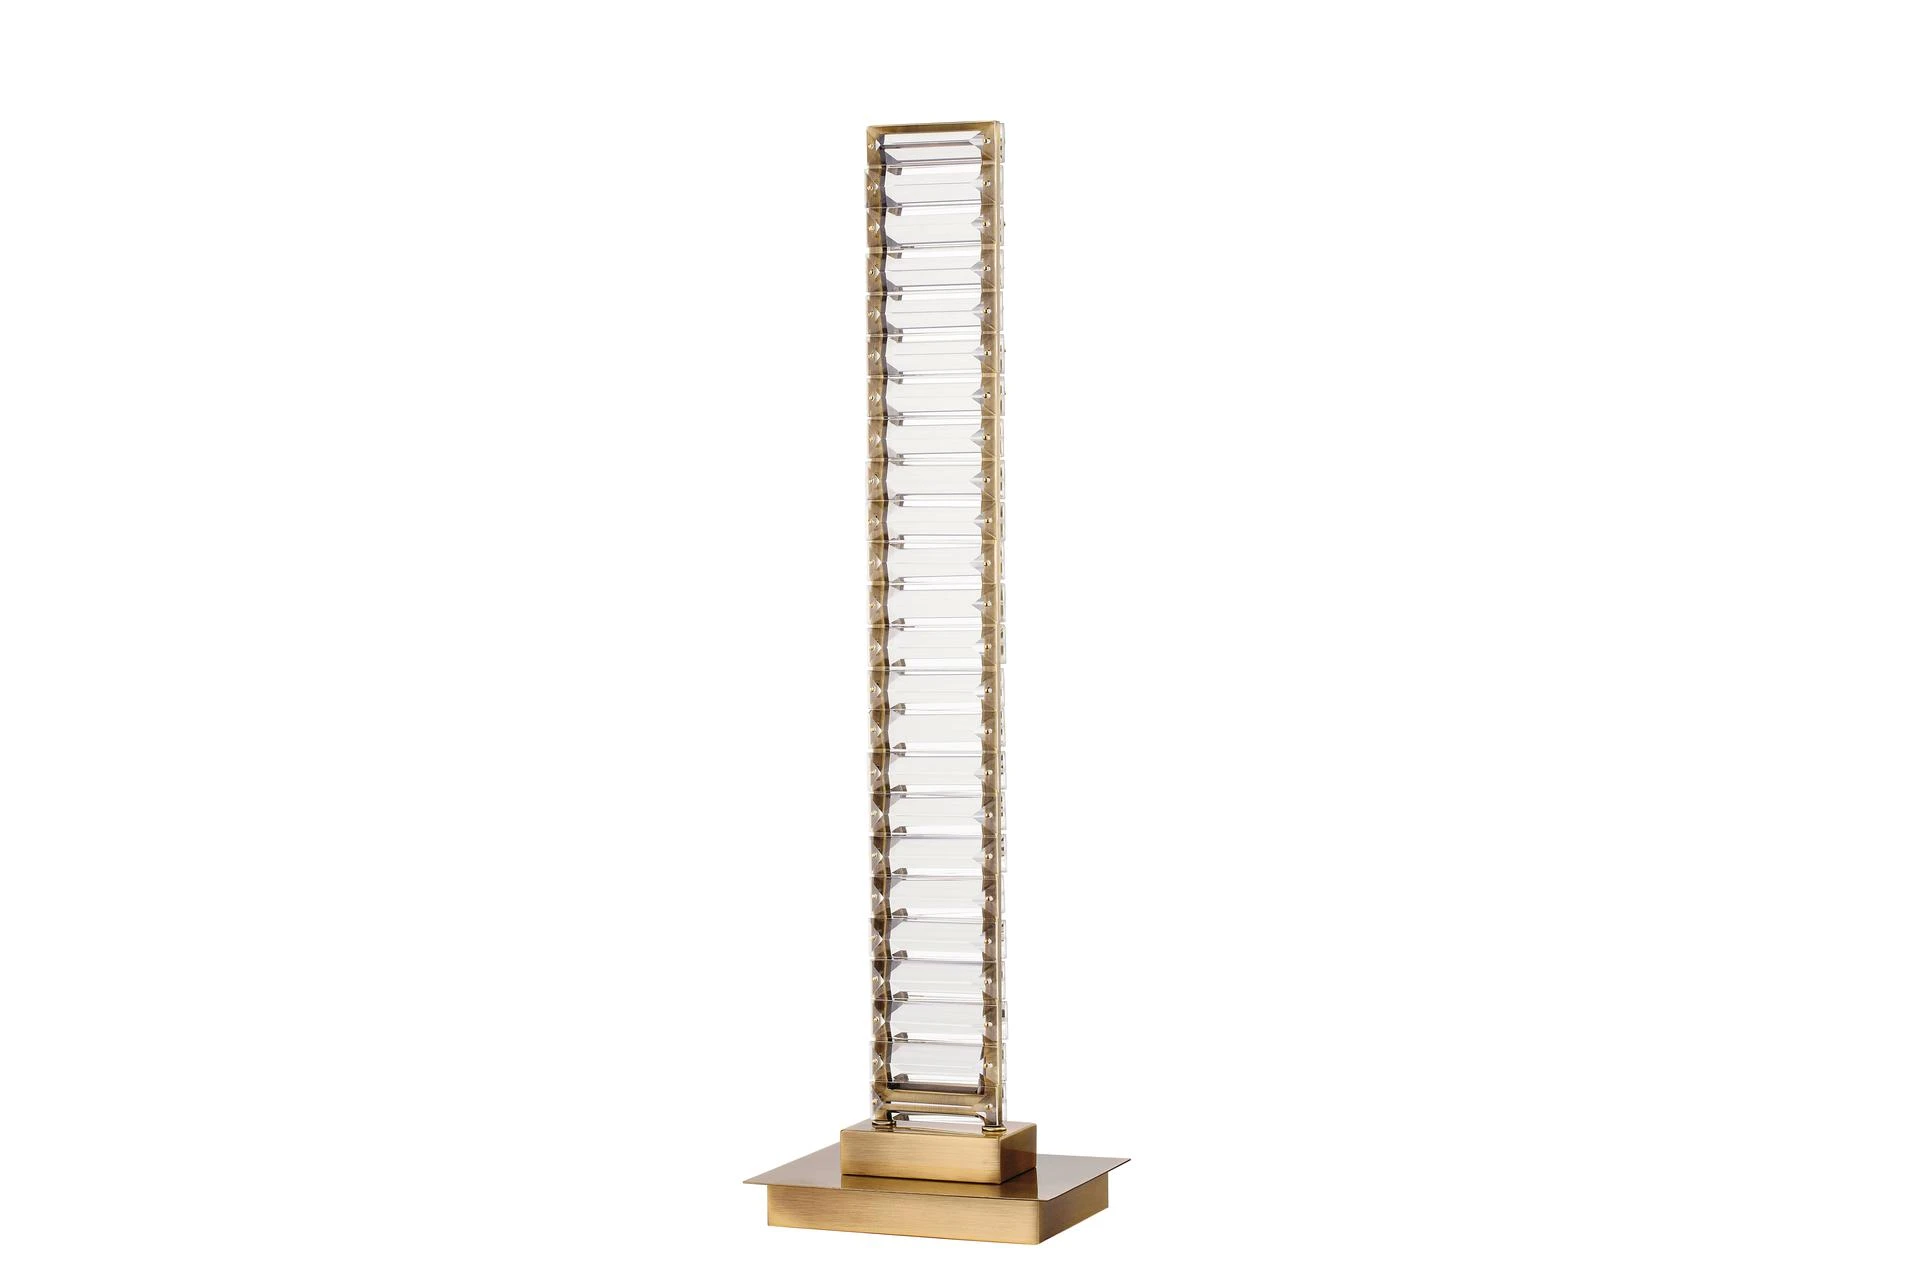 LV Crystal Table Lamp